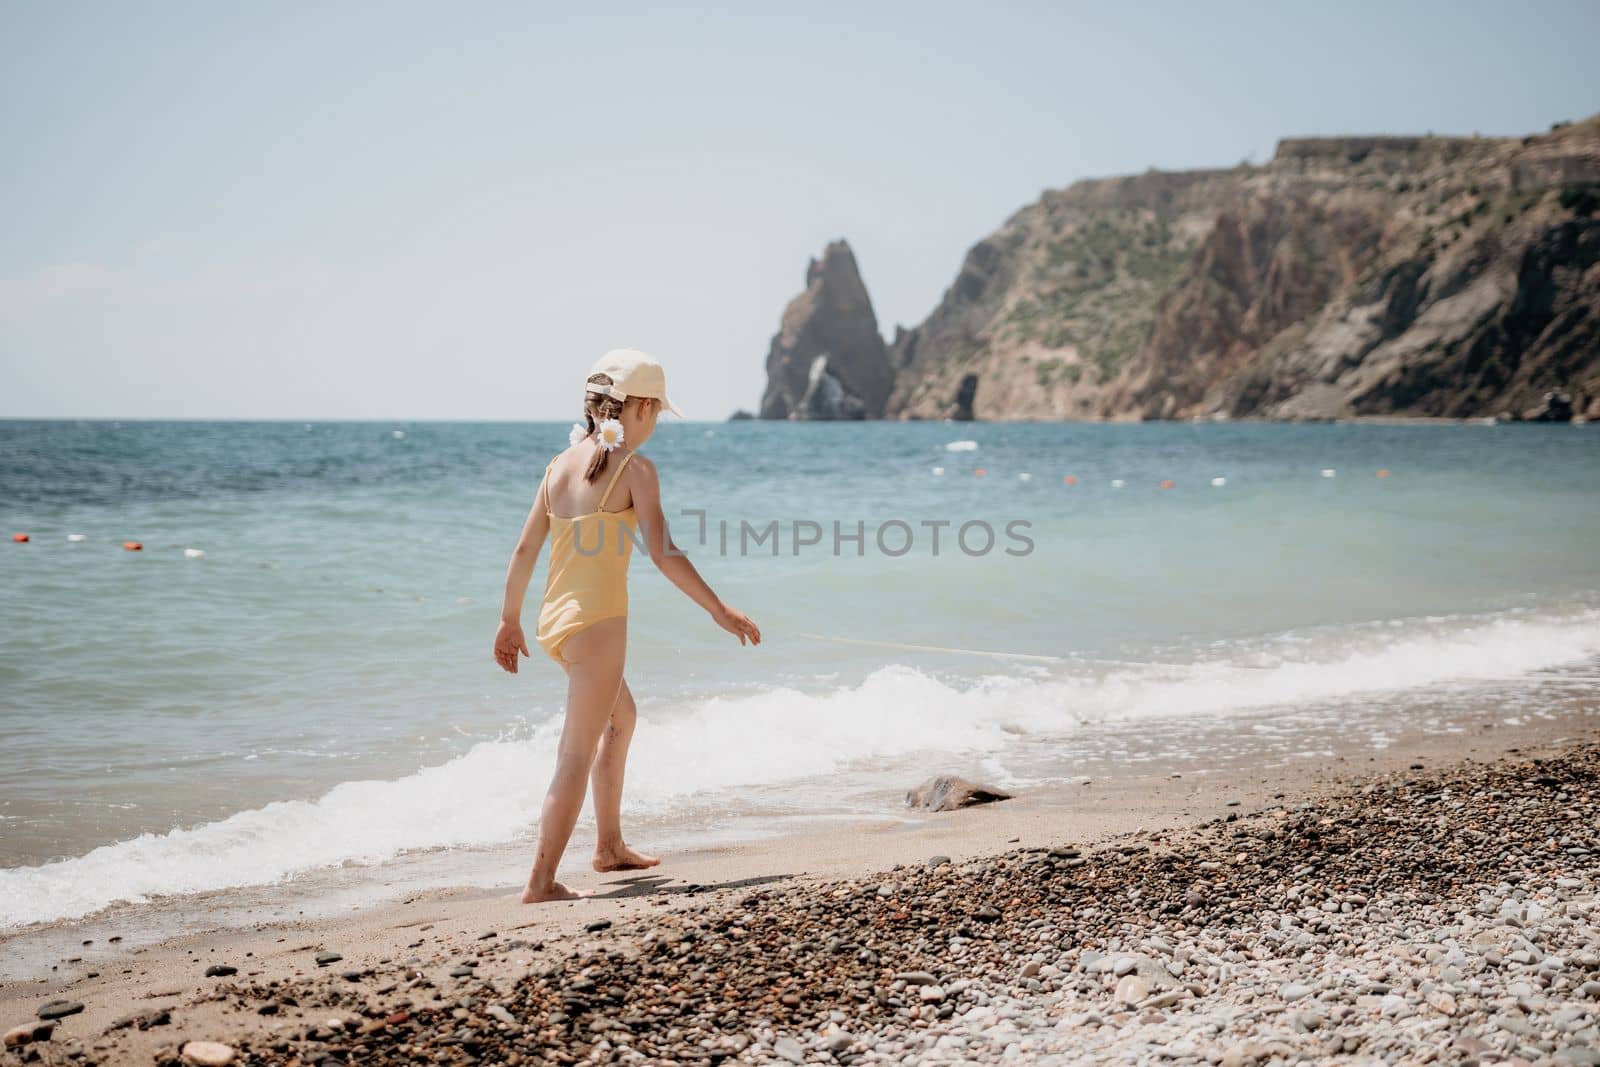 Cute little girl running along the seashore against a clear blue sea and rejoices in the rays of the summer sun. Beautiful girl in yellow swimsuit running and having fun on tropical beach